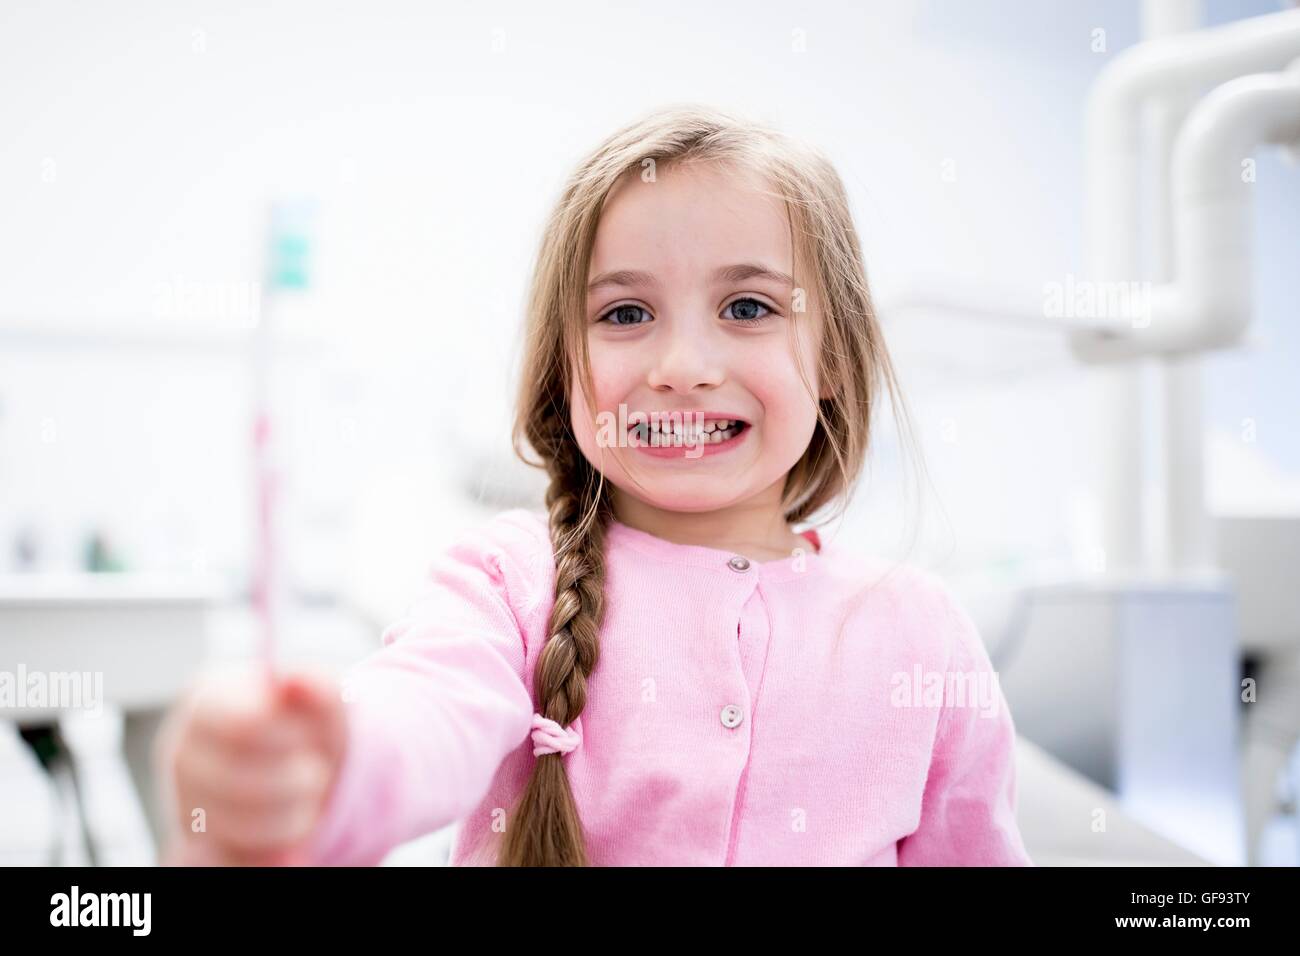 MODEL RELEASED. Close-up of girl holding toothbrush. Stock Photo